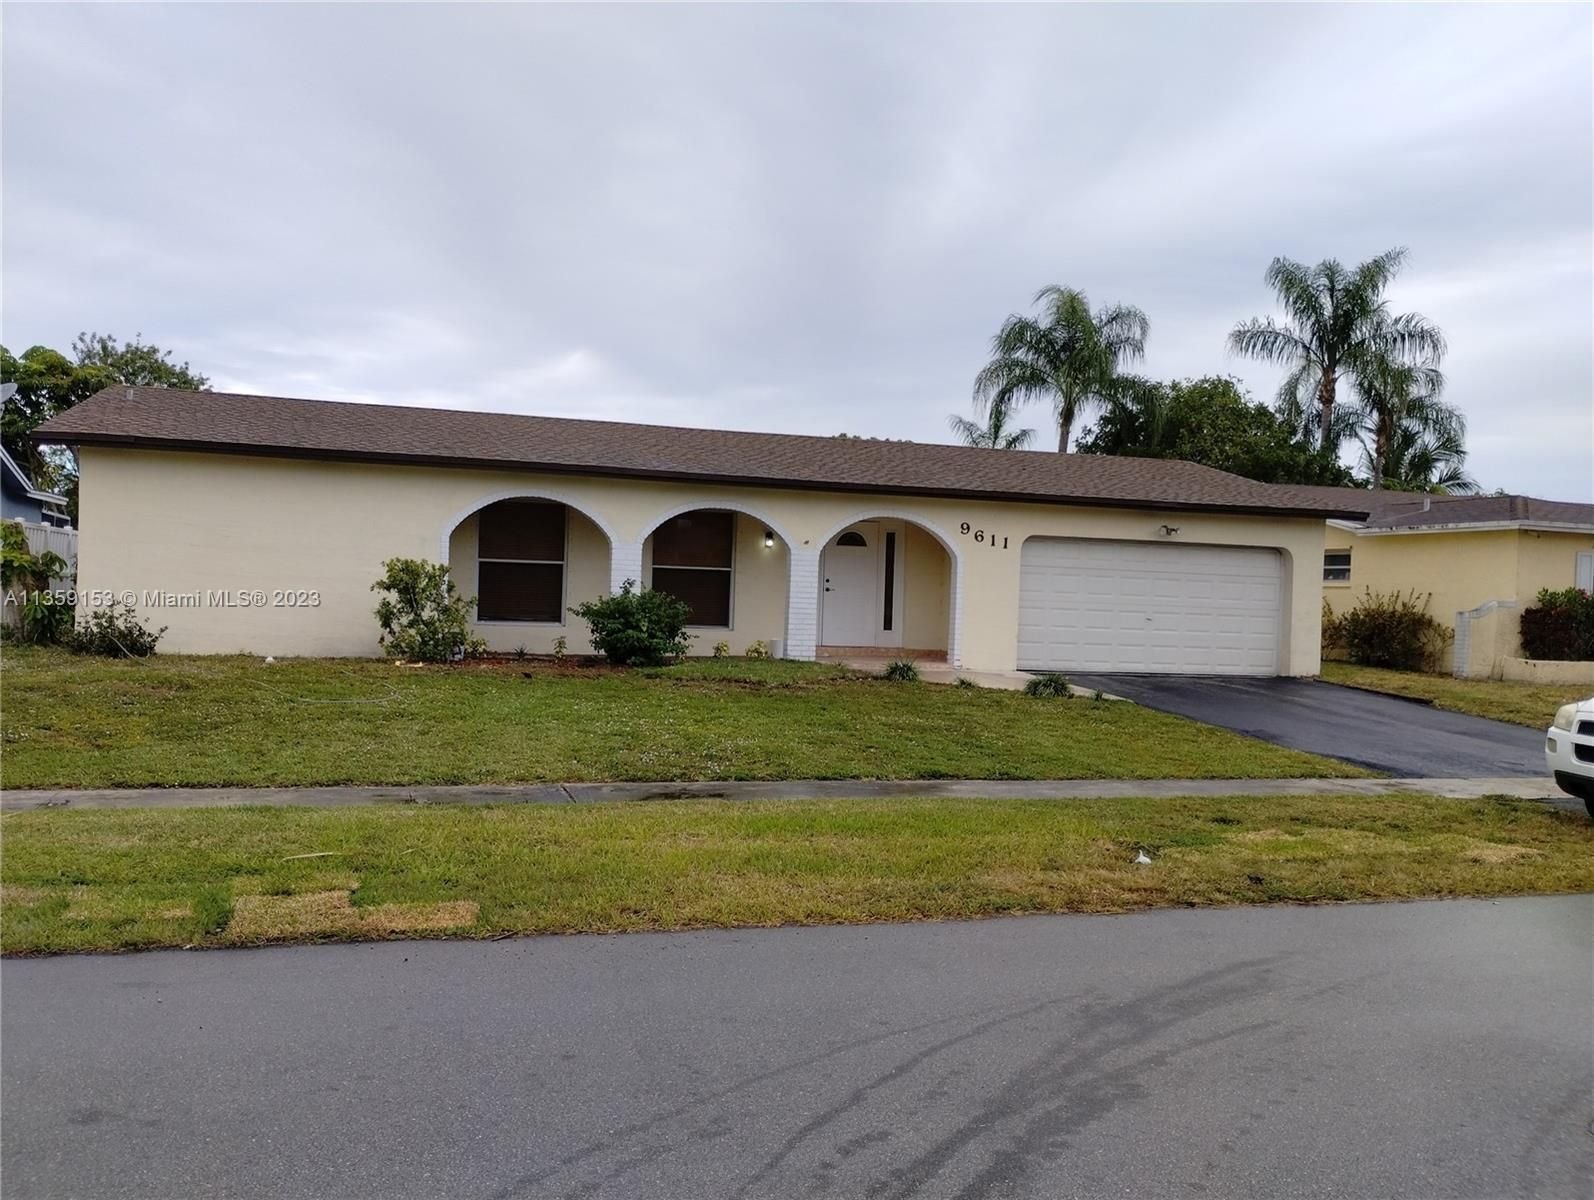 Real estate property located at 9611 24th Ct, Broward County, Sunrise, FL